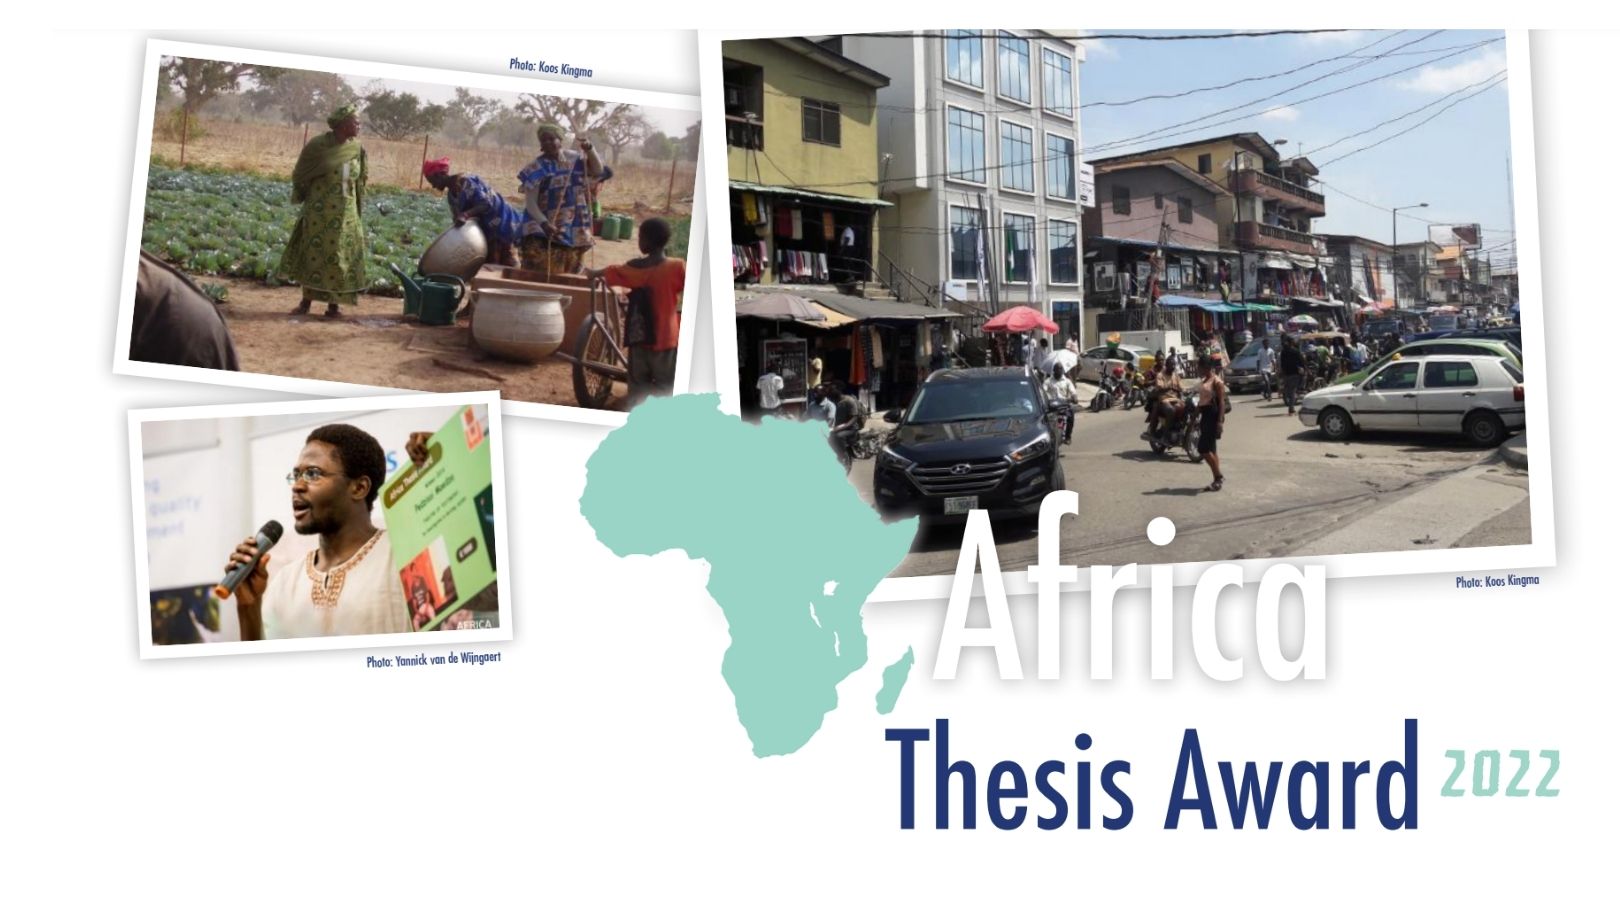 ASC Lieden Africa Thesis Award 2022 (€500 prize and publication)